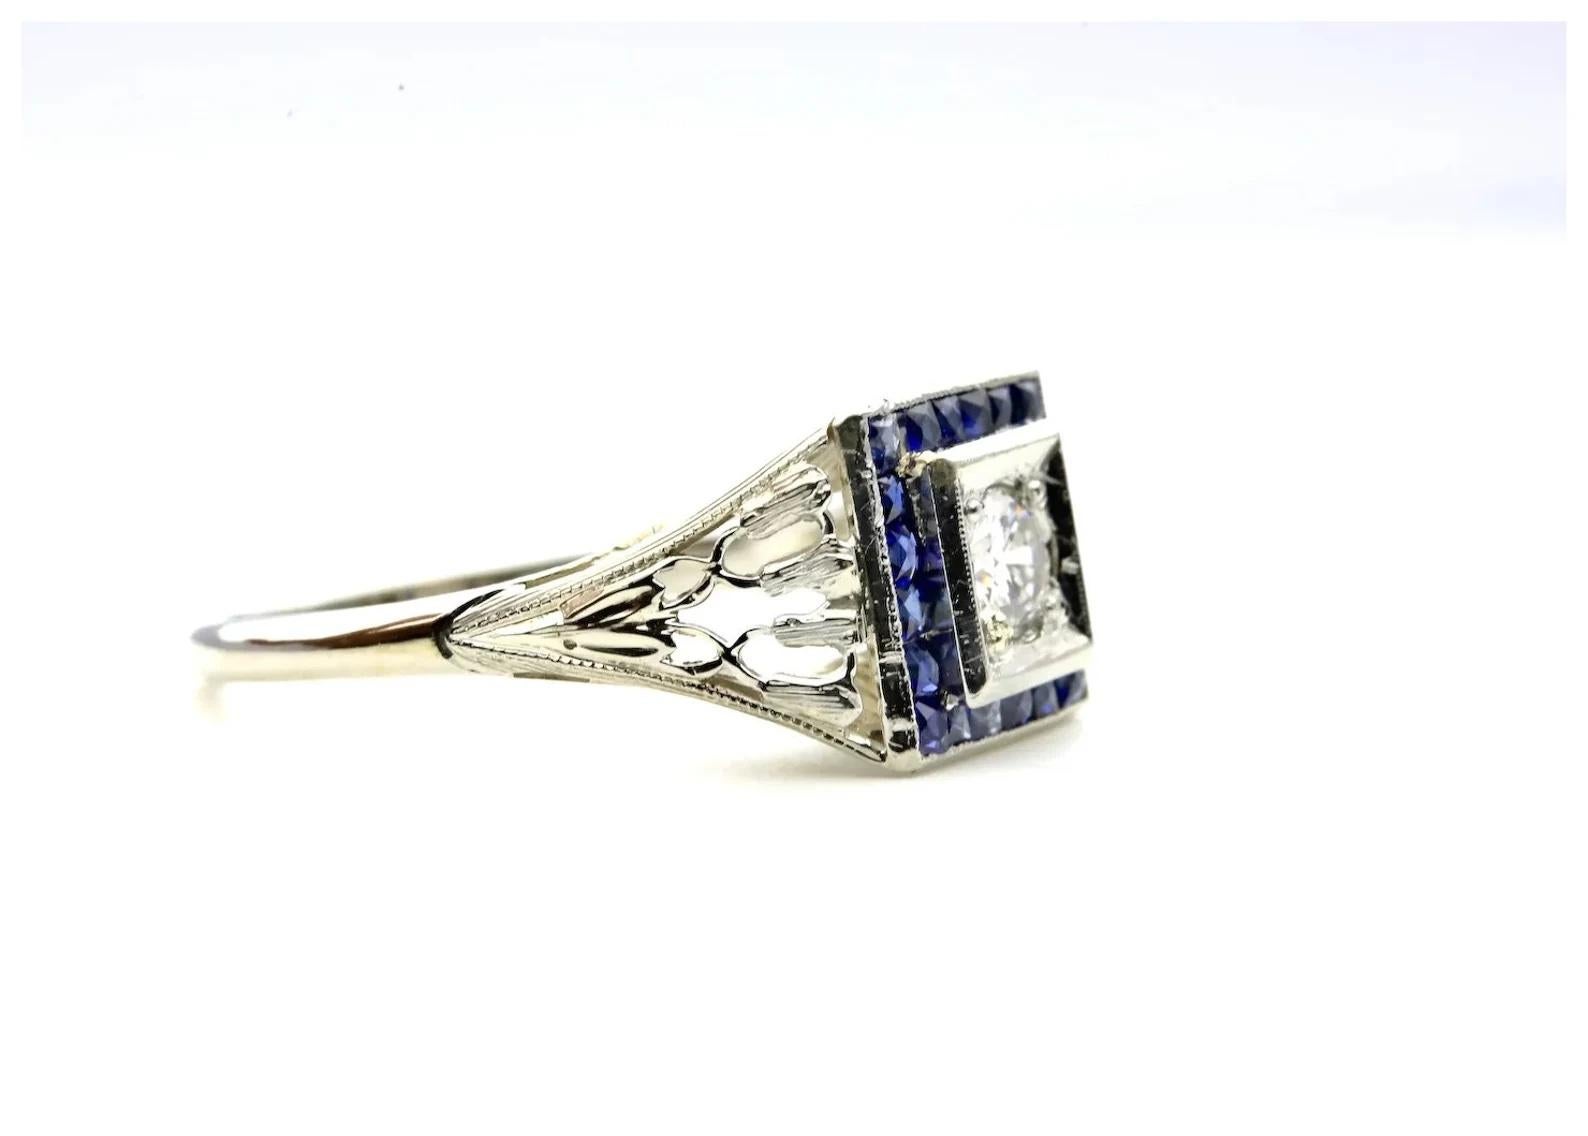 An Art Deco period diamond, and French cut sapphire ring in 18 karat white gold. Featuring a 0.20 carat H color VS2 clarity old European cut diamond surrounded by French cut sapphires. The twenty French cut sapphires weigh a combined 0.40 carats and